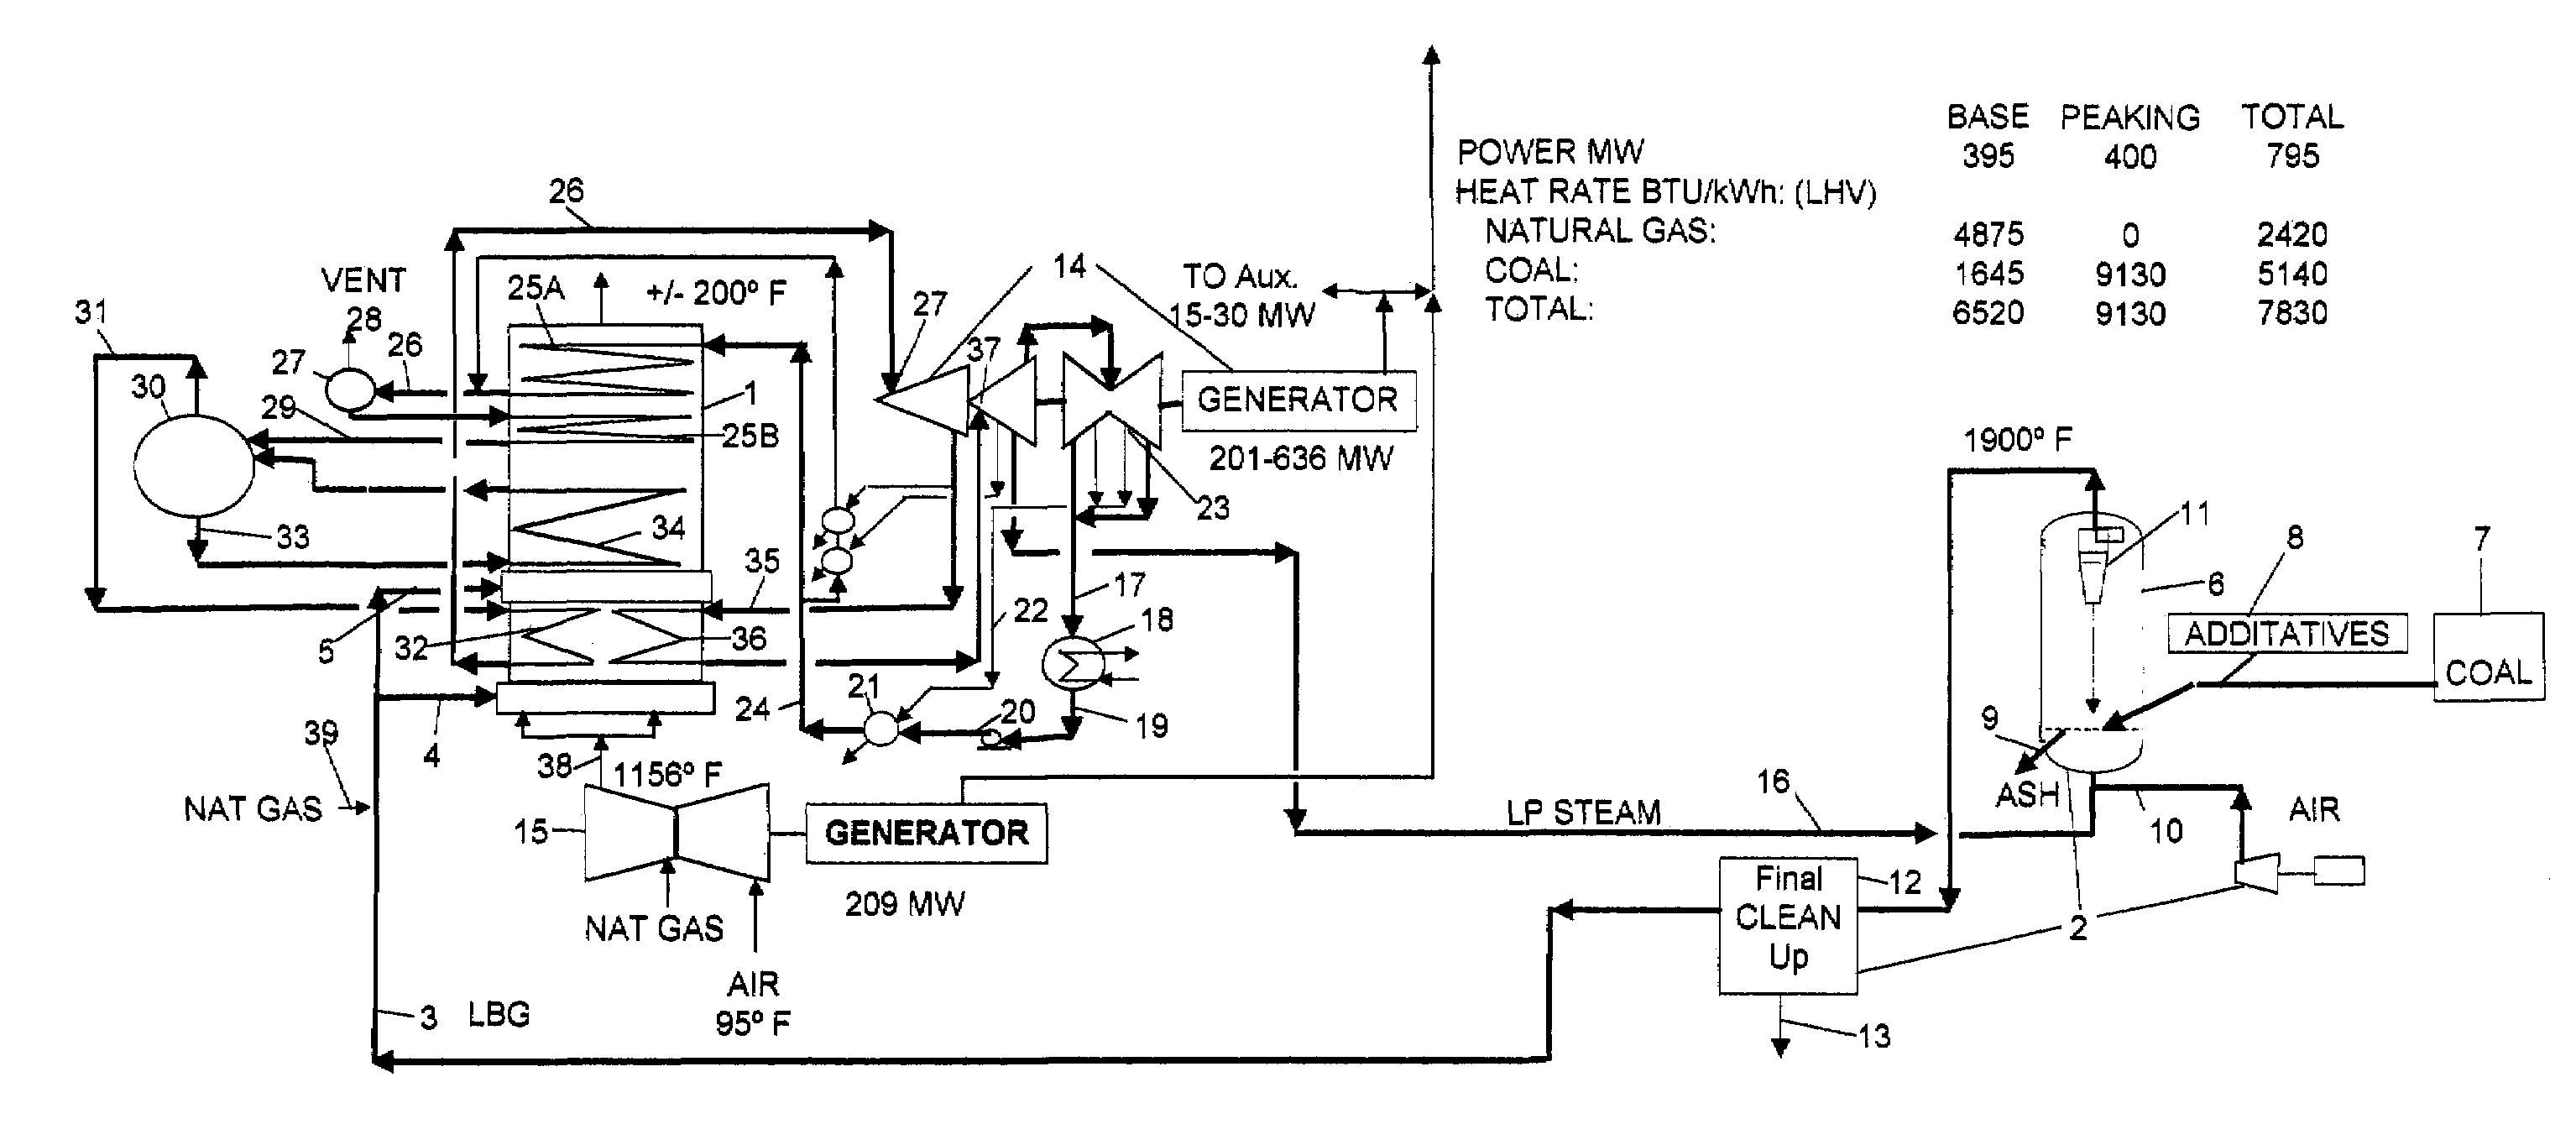 Combined cycle for generating electric power